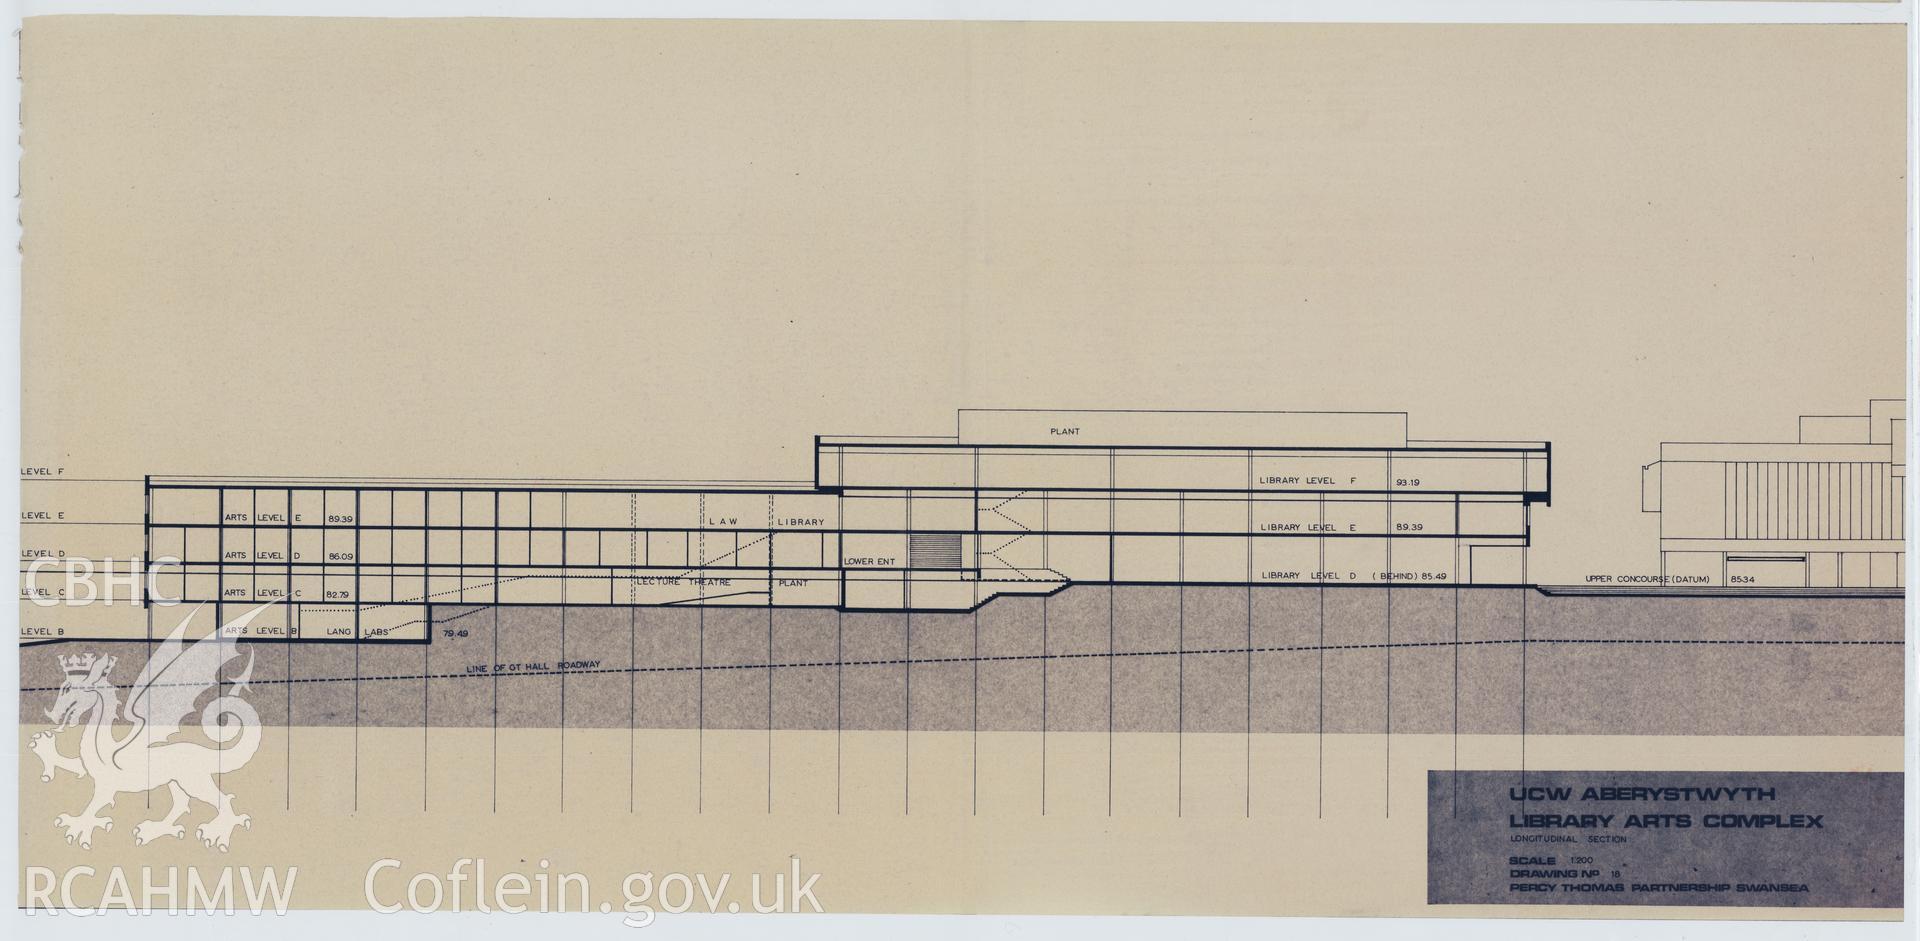 Digital copy of Drawing No 18, longitudinal section at the proposed Library Arts Complex at University College Aberystwyth, produced by Percy Thomas Partnership. Scale 1:200.